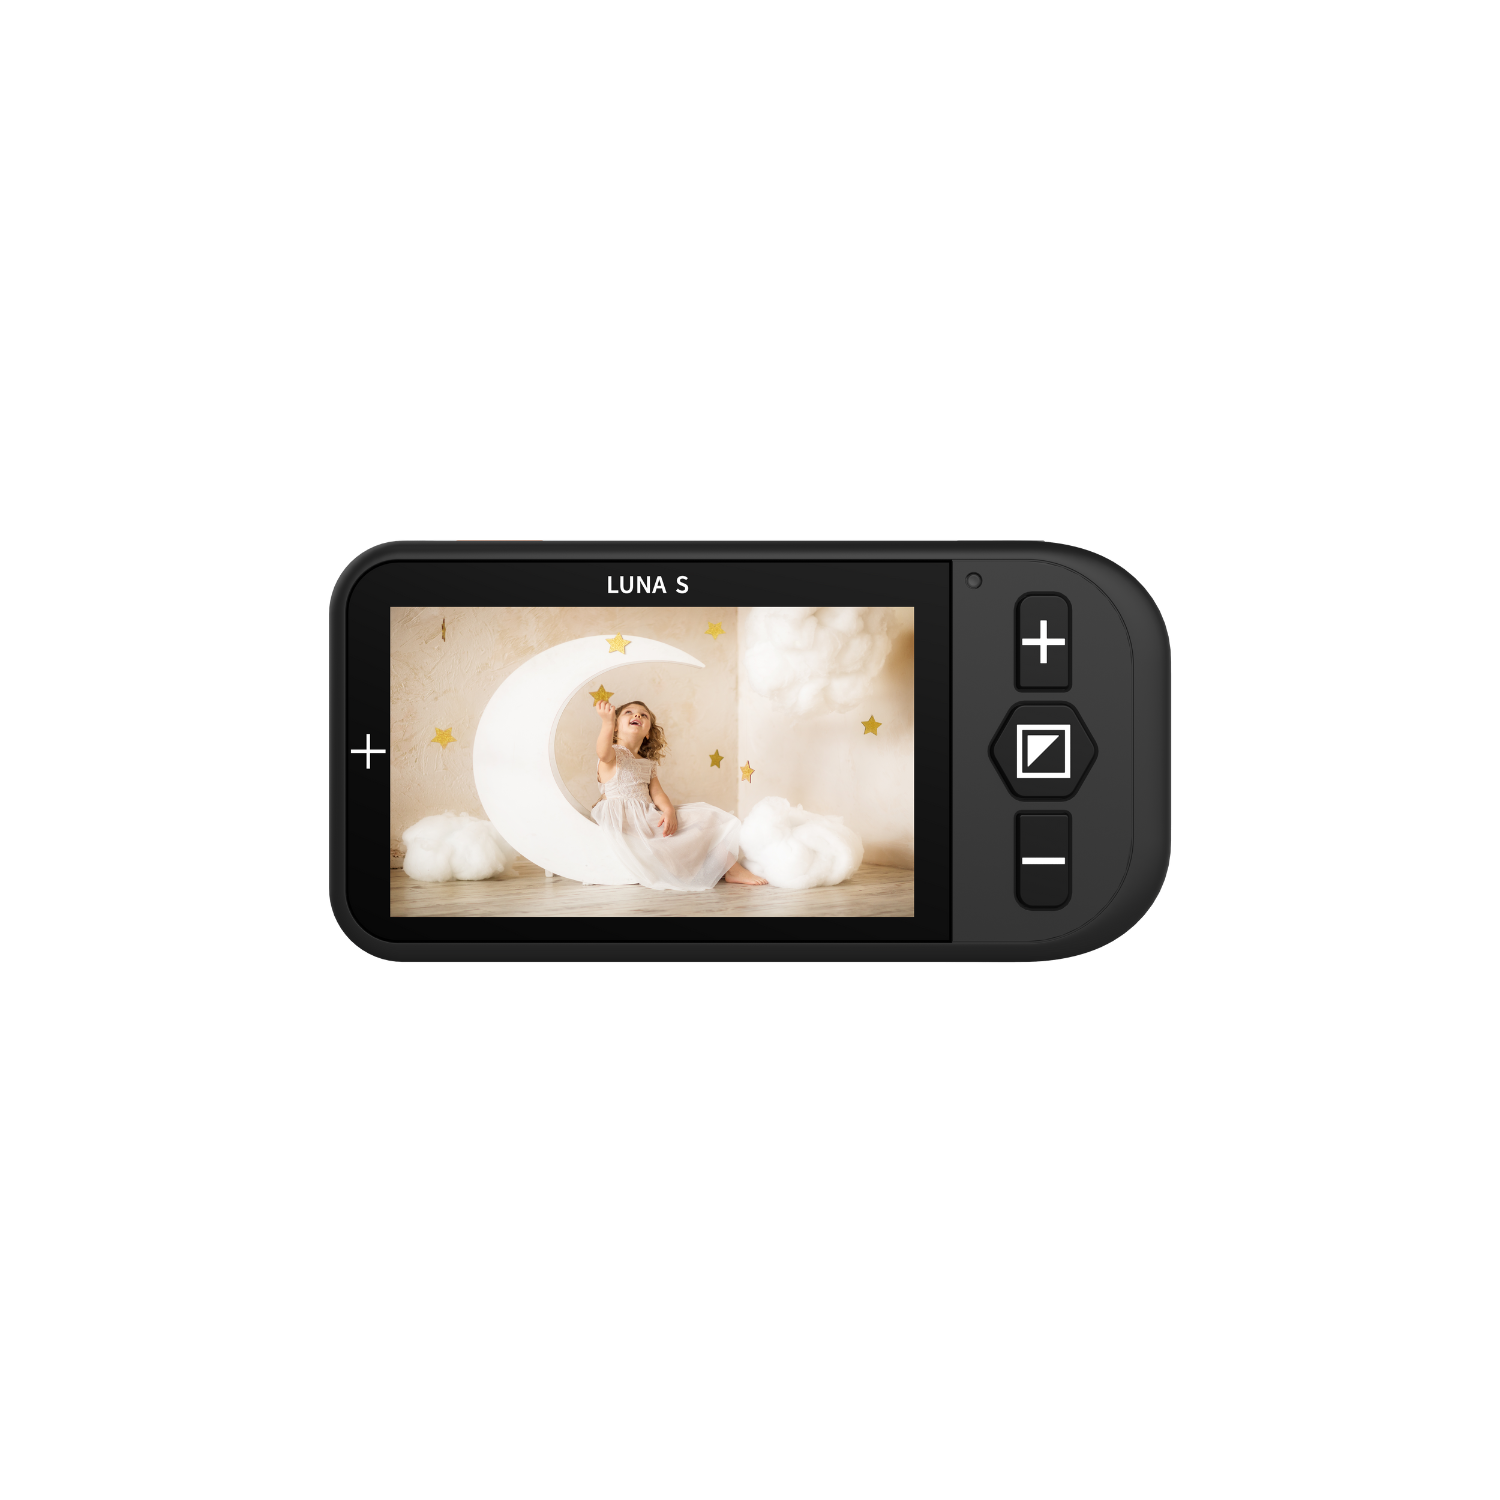 Image of front of Zommax USA Luna S handheld video magnifier